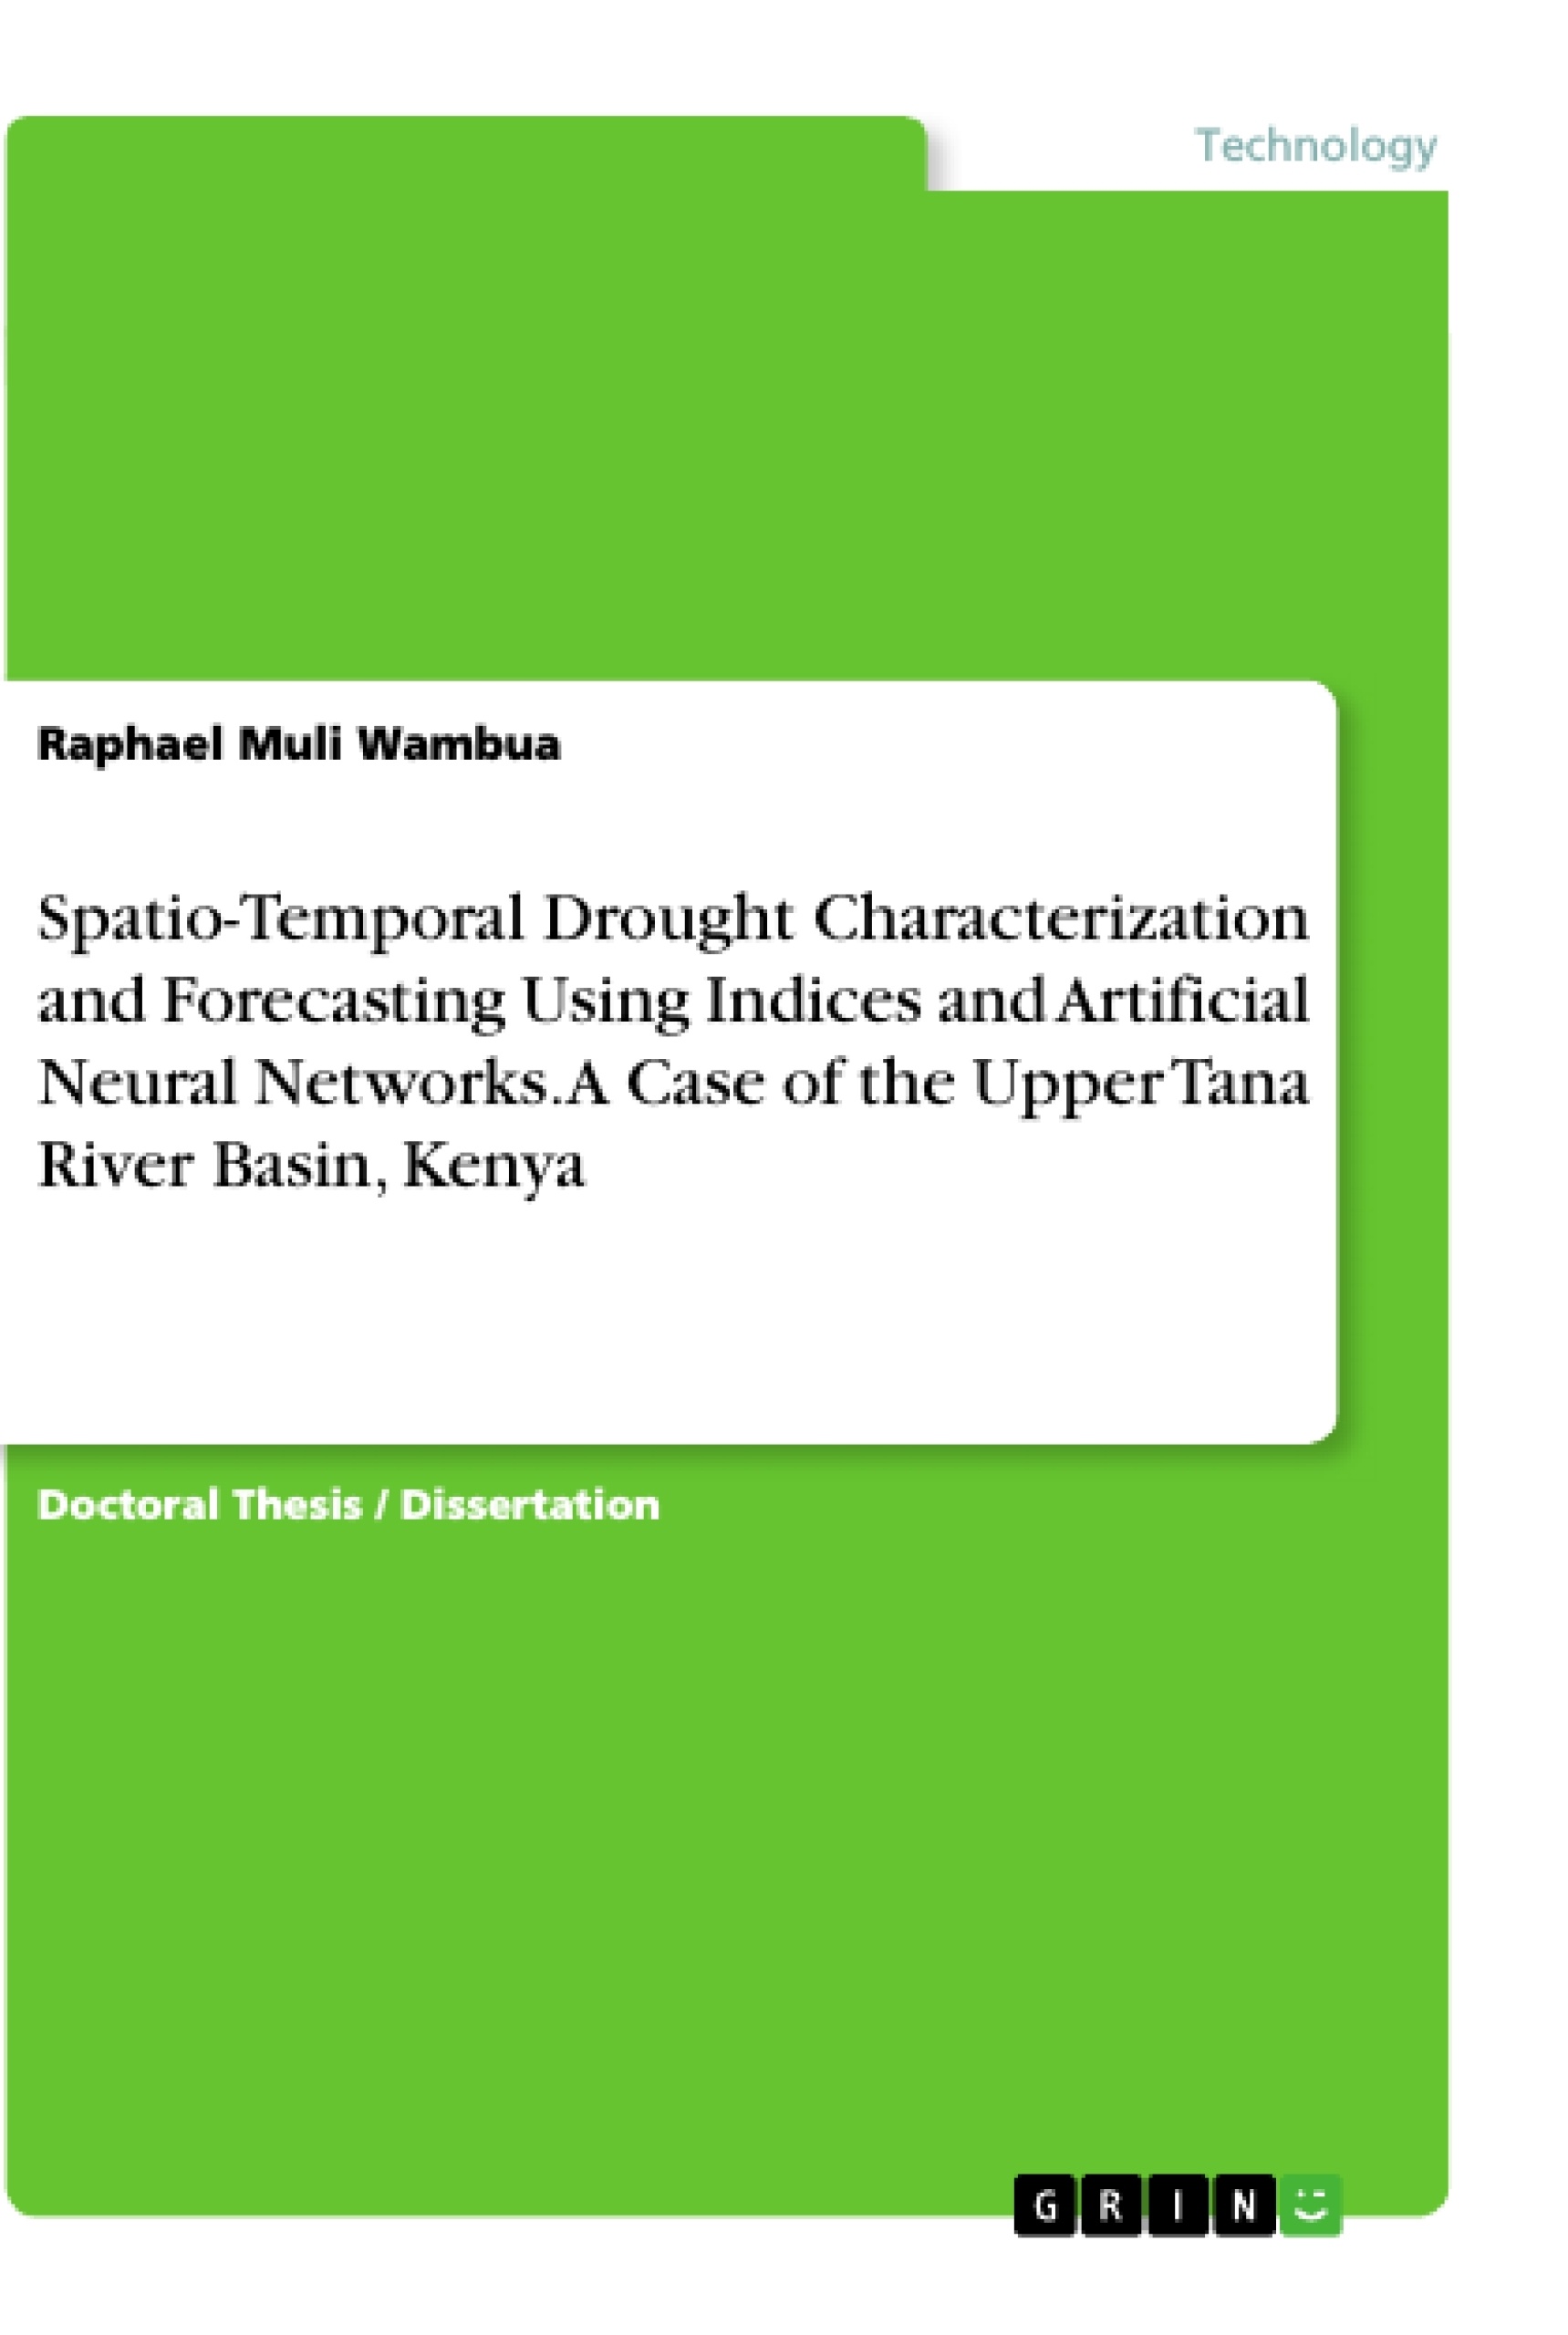 Título: Spatio-Temporal Drought Characterization and Forecasting Using Indices and Artificial Neural Networks. A Case of the Upper Tana River Basin, Kenya